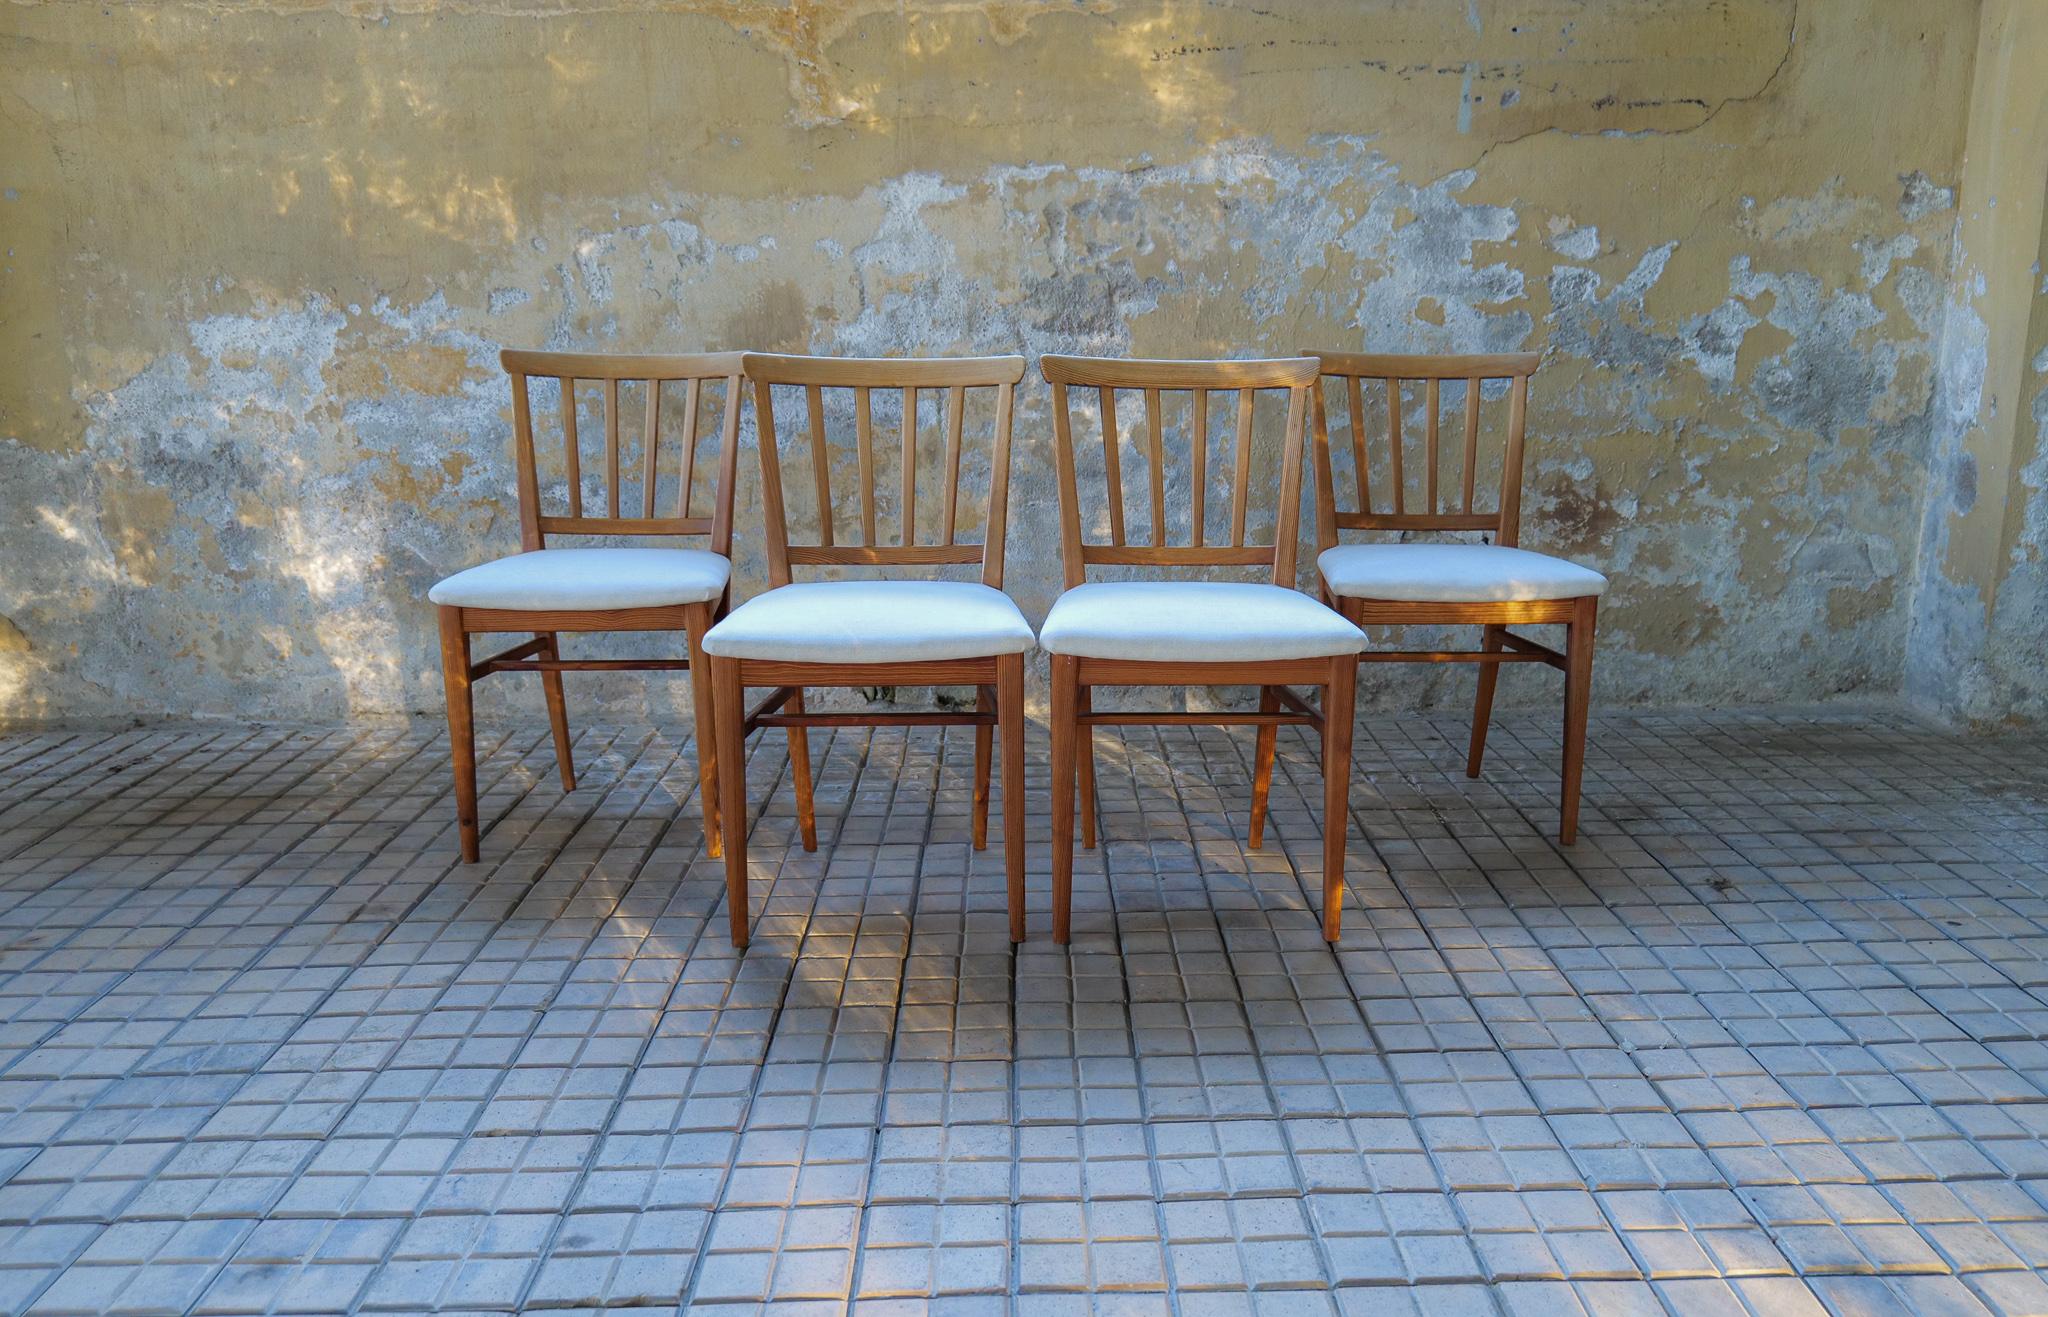 Swedish Midcentury Set of 4 Carl Malmsten Chairs Dining in Pine, Sweden, 1940s For Sale